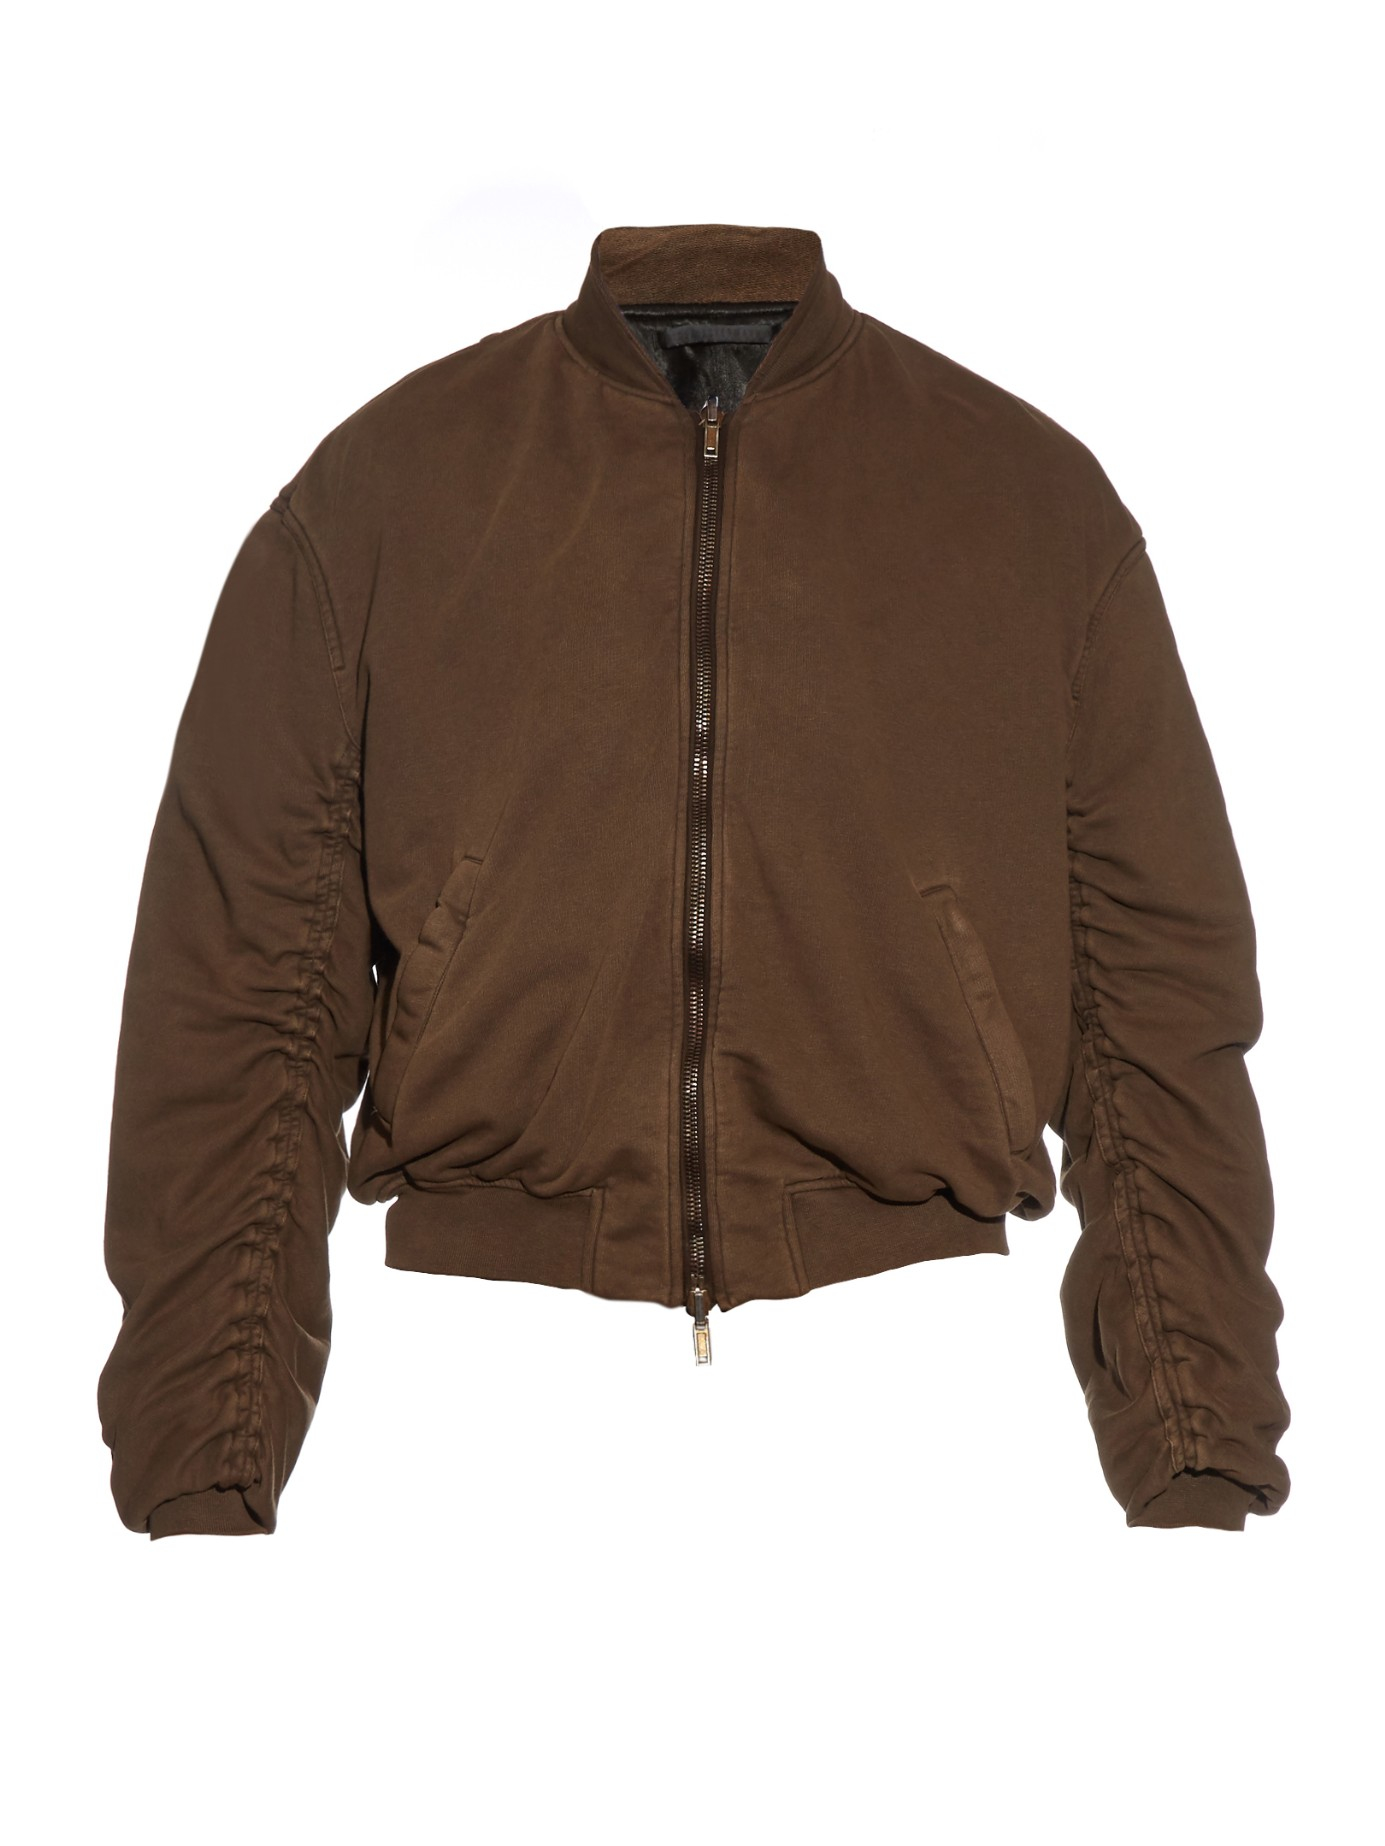 Lyst - Haider Ackermann Ruched Cotton-jersey Bomber Jacket in Brown for Men